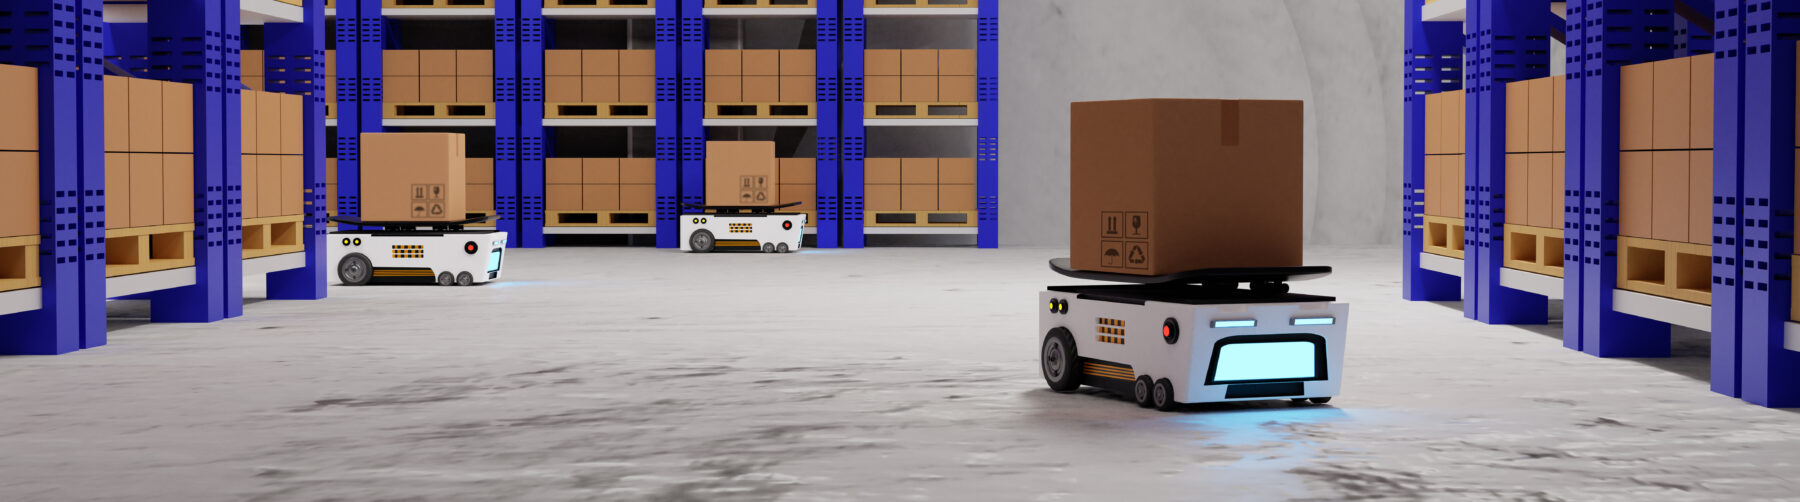 [This image depicts a warehouse interior with an automated robotic system in operation. The warehouse has tall blue racking filled with uniformly sized brown cardboard boxes. There are at least three robots in view; they appear to be automated guided vehicles (AGVs) equipped with shelves to carry boxes. These robots have a white body with black and yellow caution tape design elements, signaling industrial use. The front of each robot has a blue light screen, possibly for status indication or interaction. The floor is a polished grey surface, reflecting a bit of the environment, and the overall lighting is bright, suggesting an efficient, modern logistics or distribution center setup.] (This text is generated with ChatGPT4)